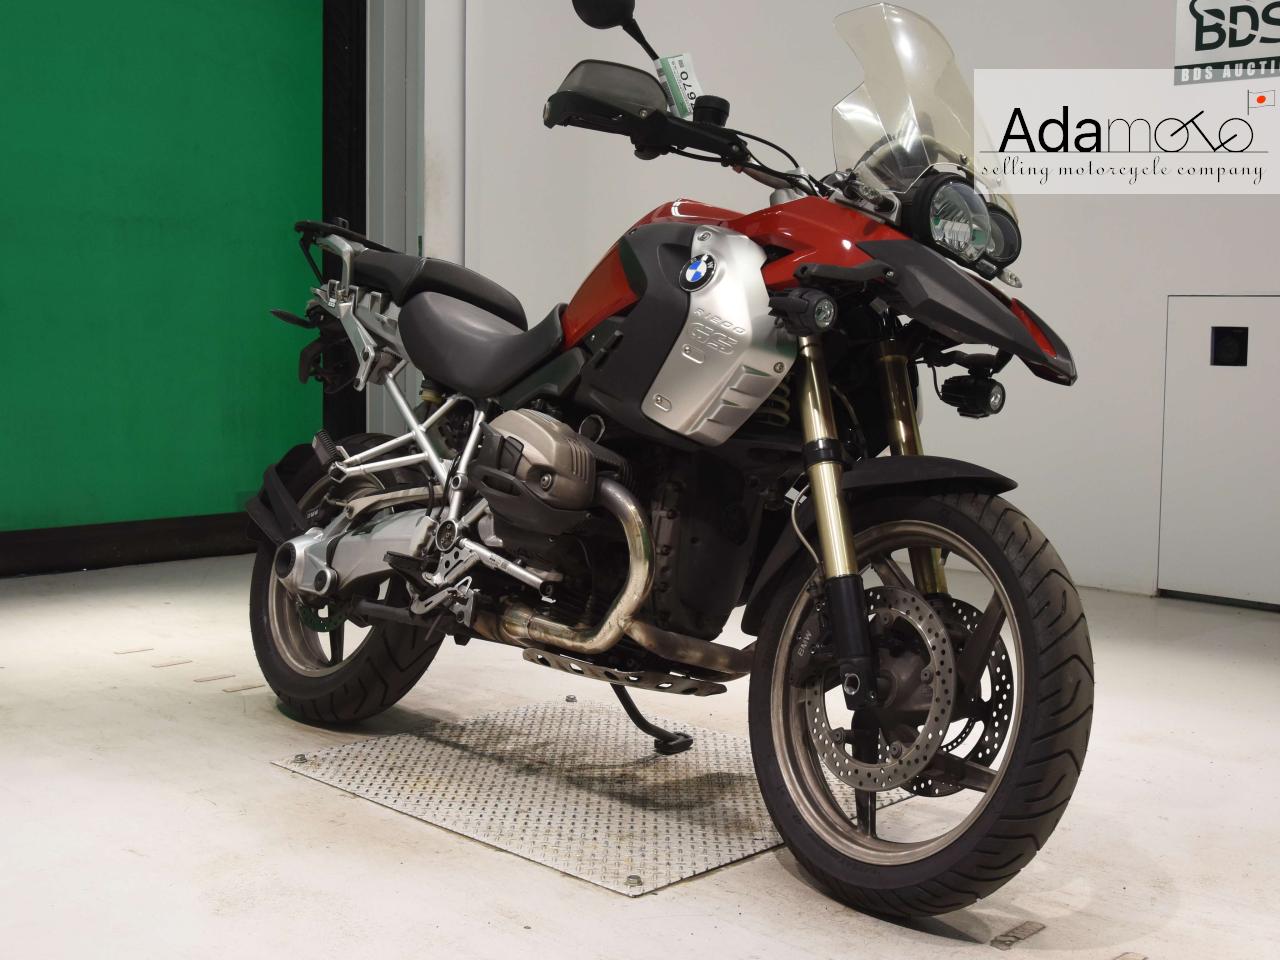 BMW R1200GS - Adamoto - Motorcycles from Japan